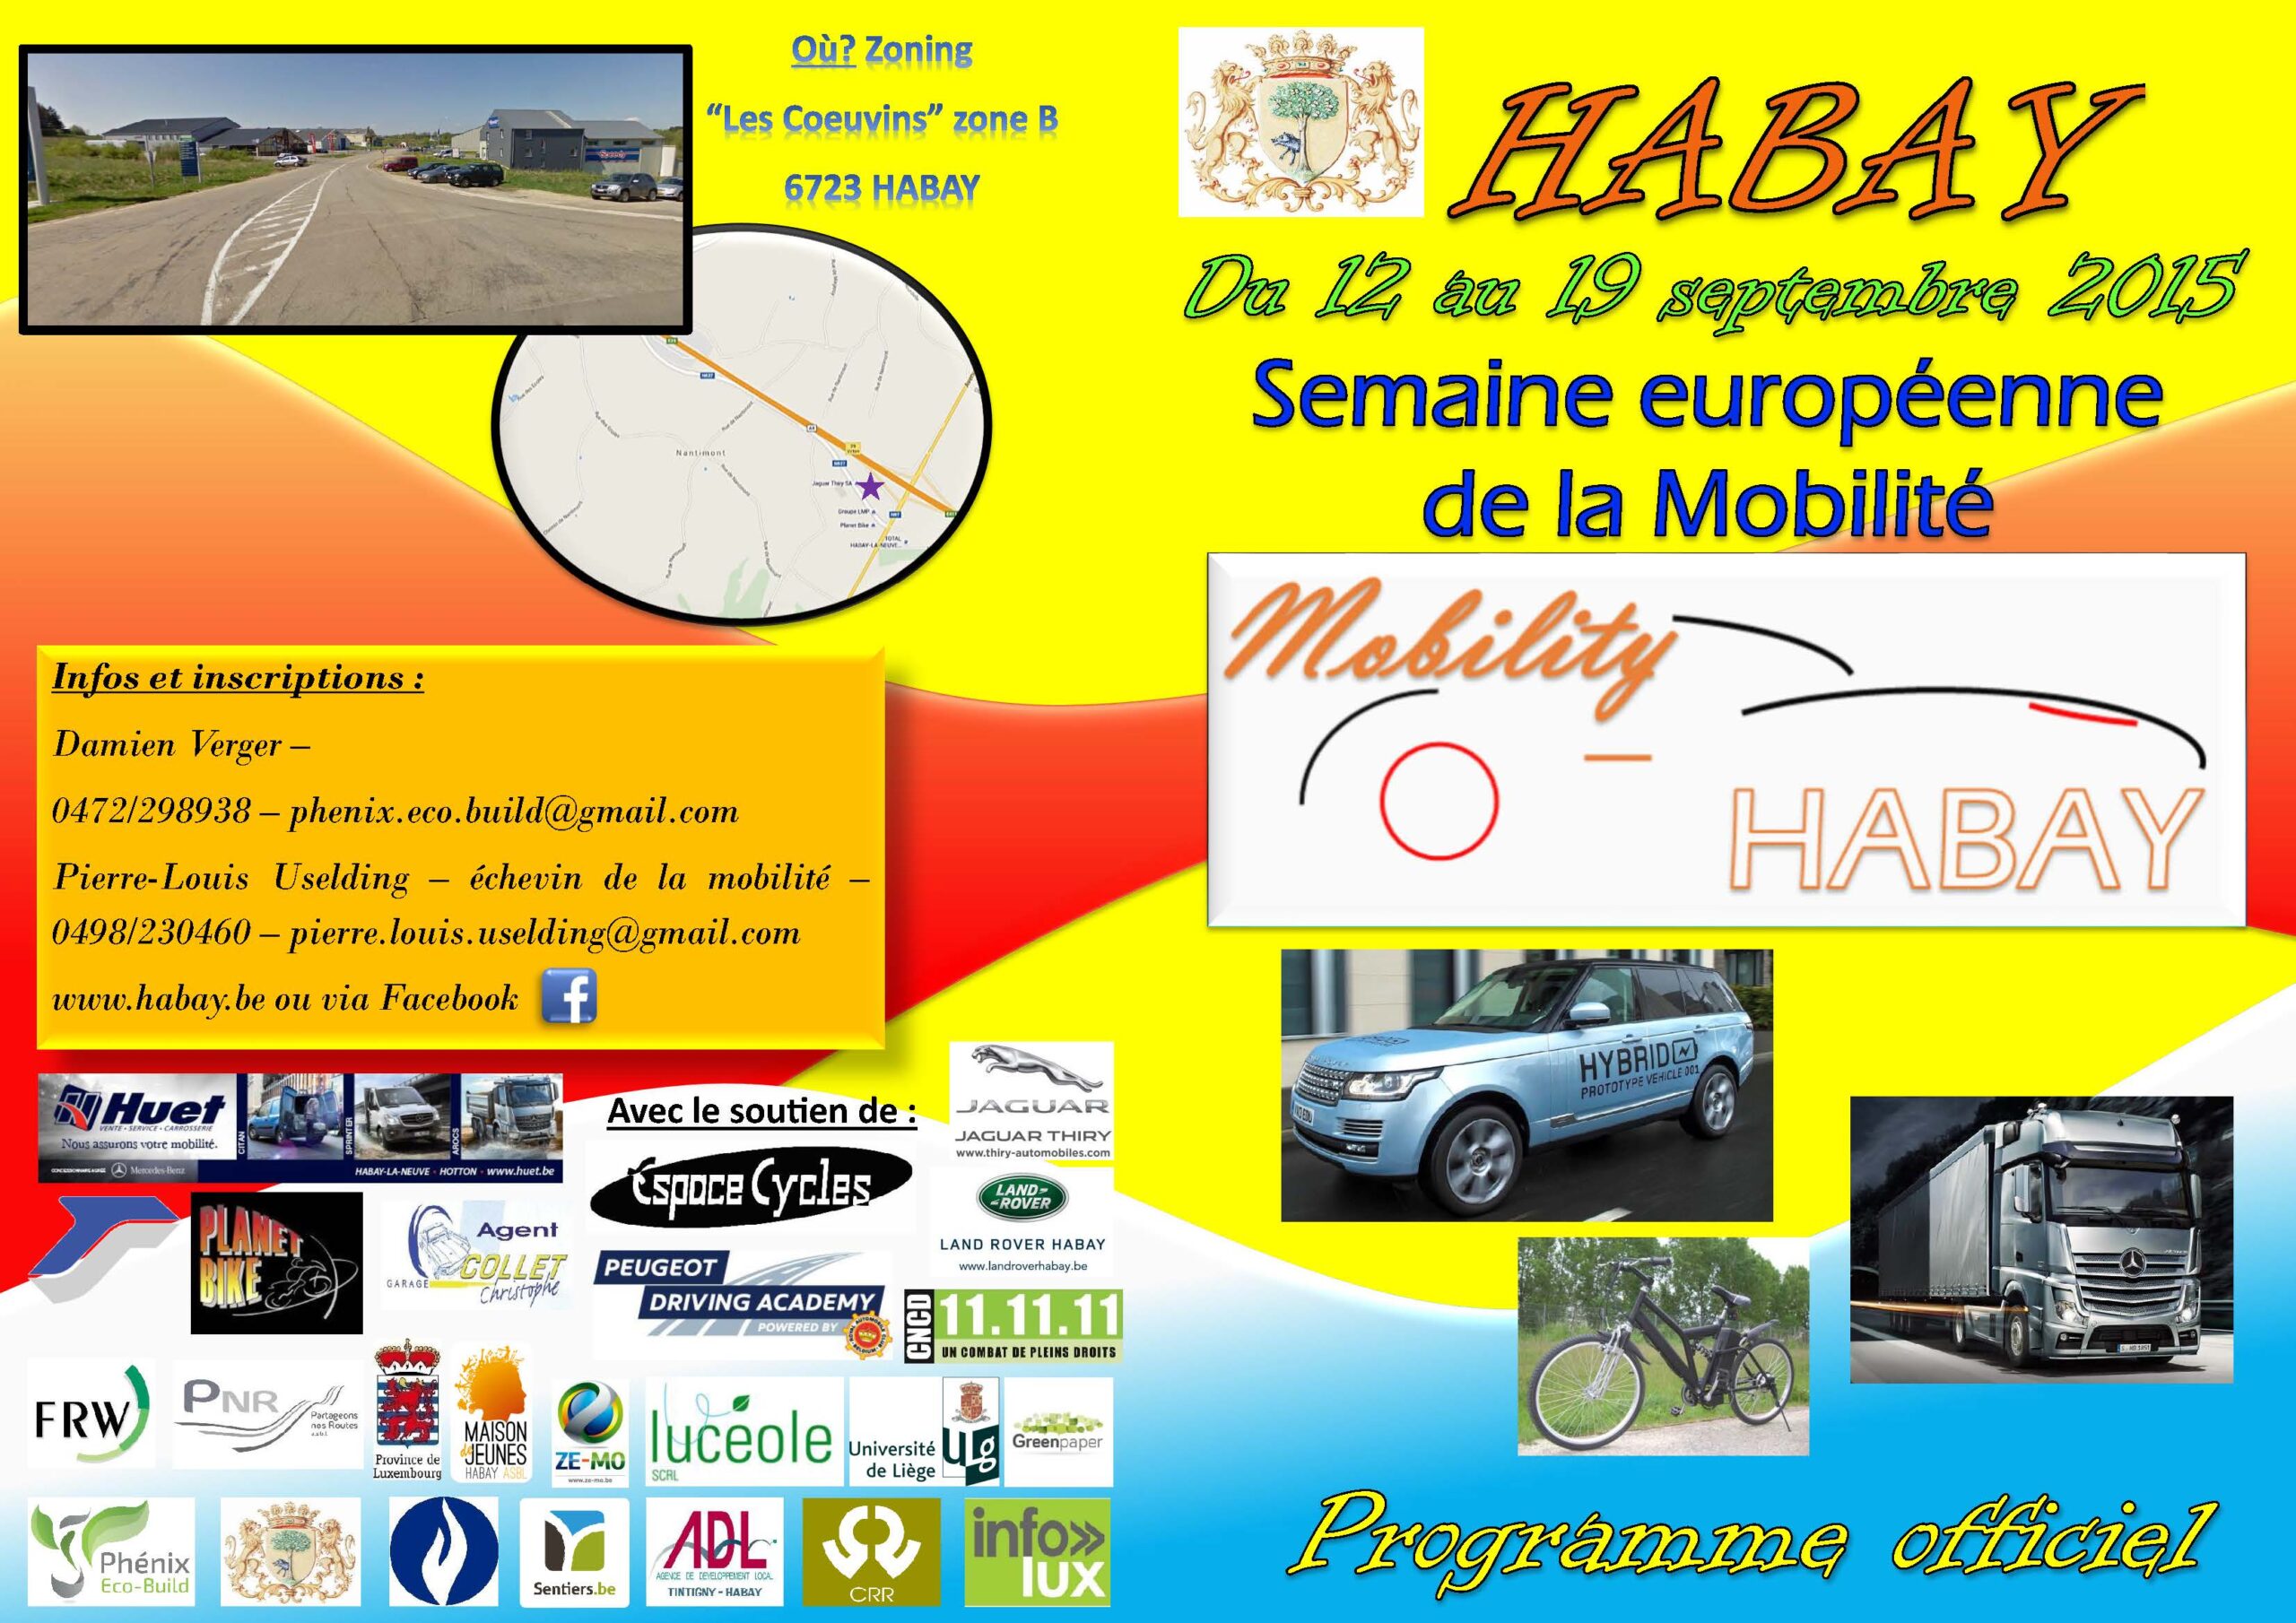 Mobility Habay